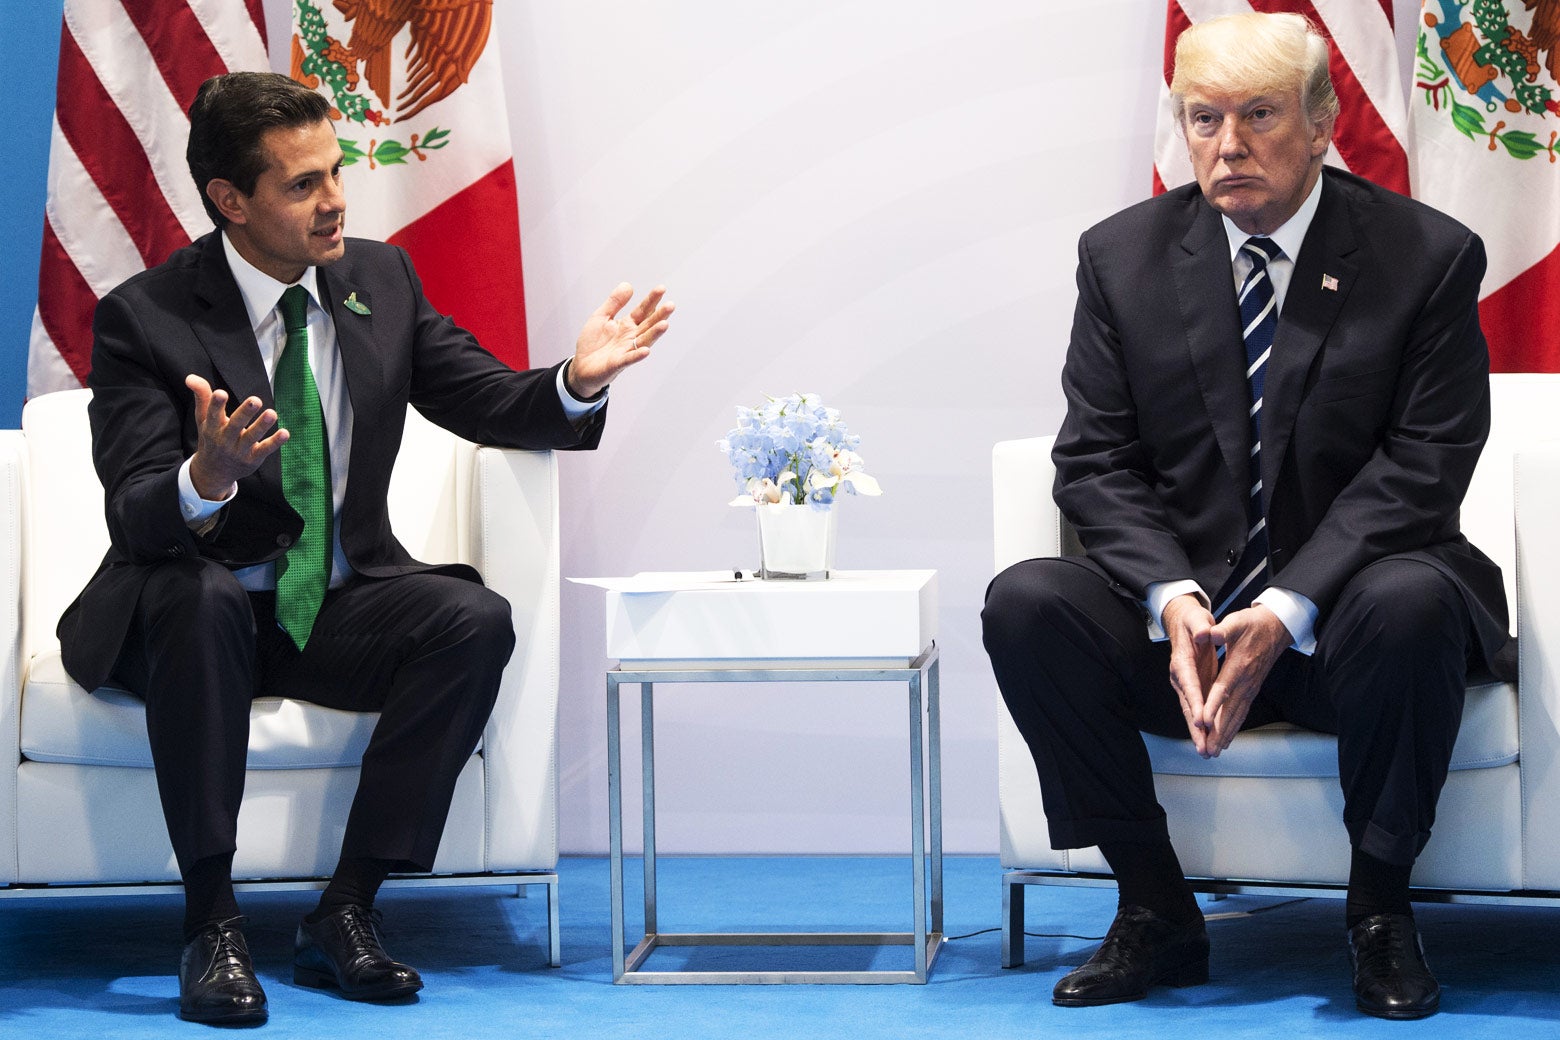 Enrique Peña Nieto and Donald Trump sit beside each other in white armchairs.